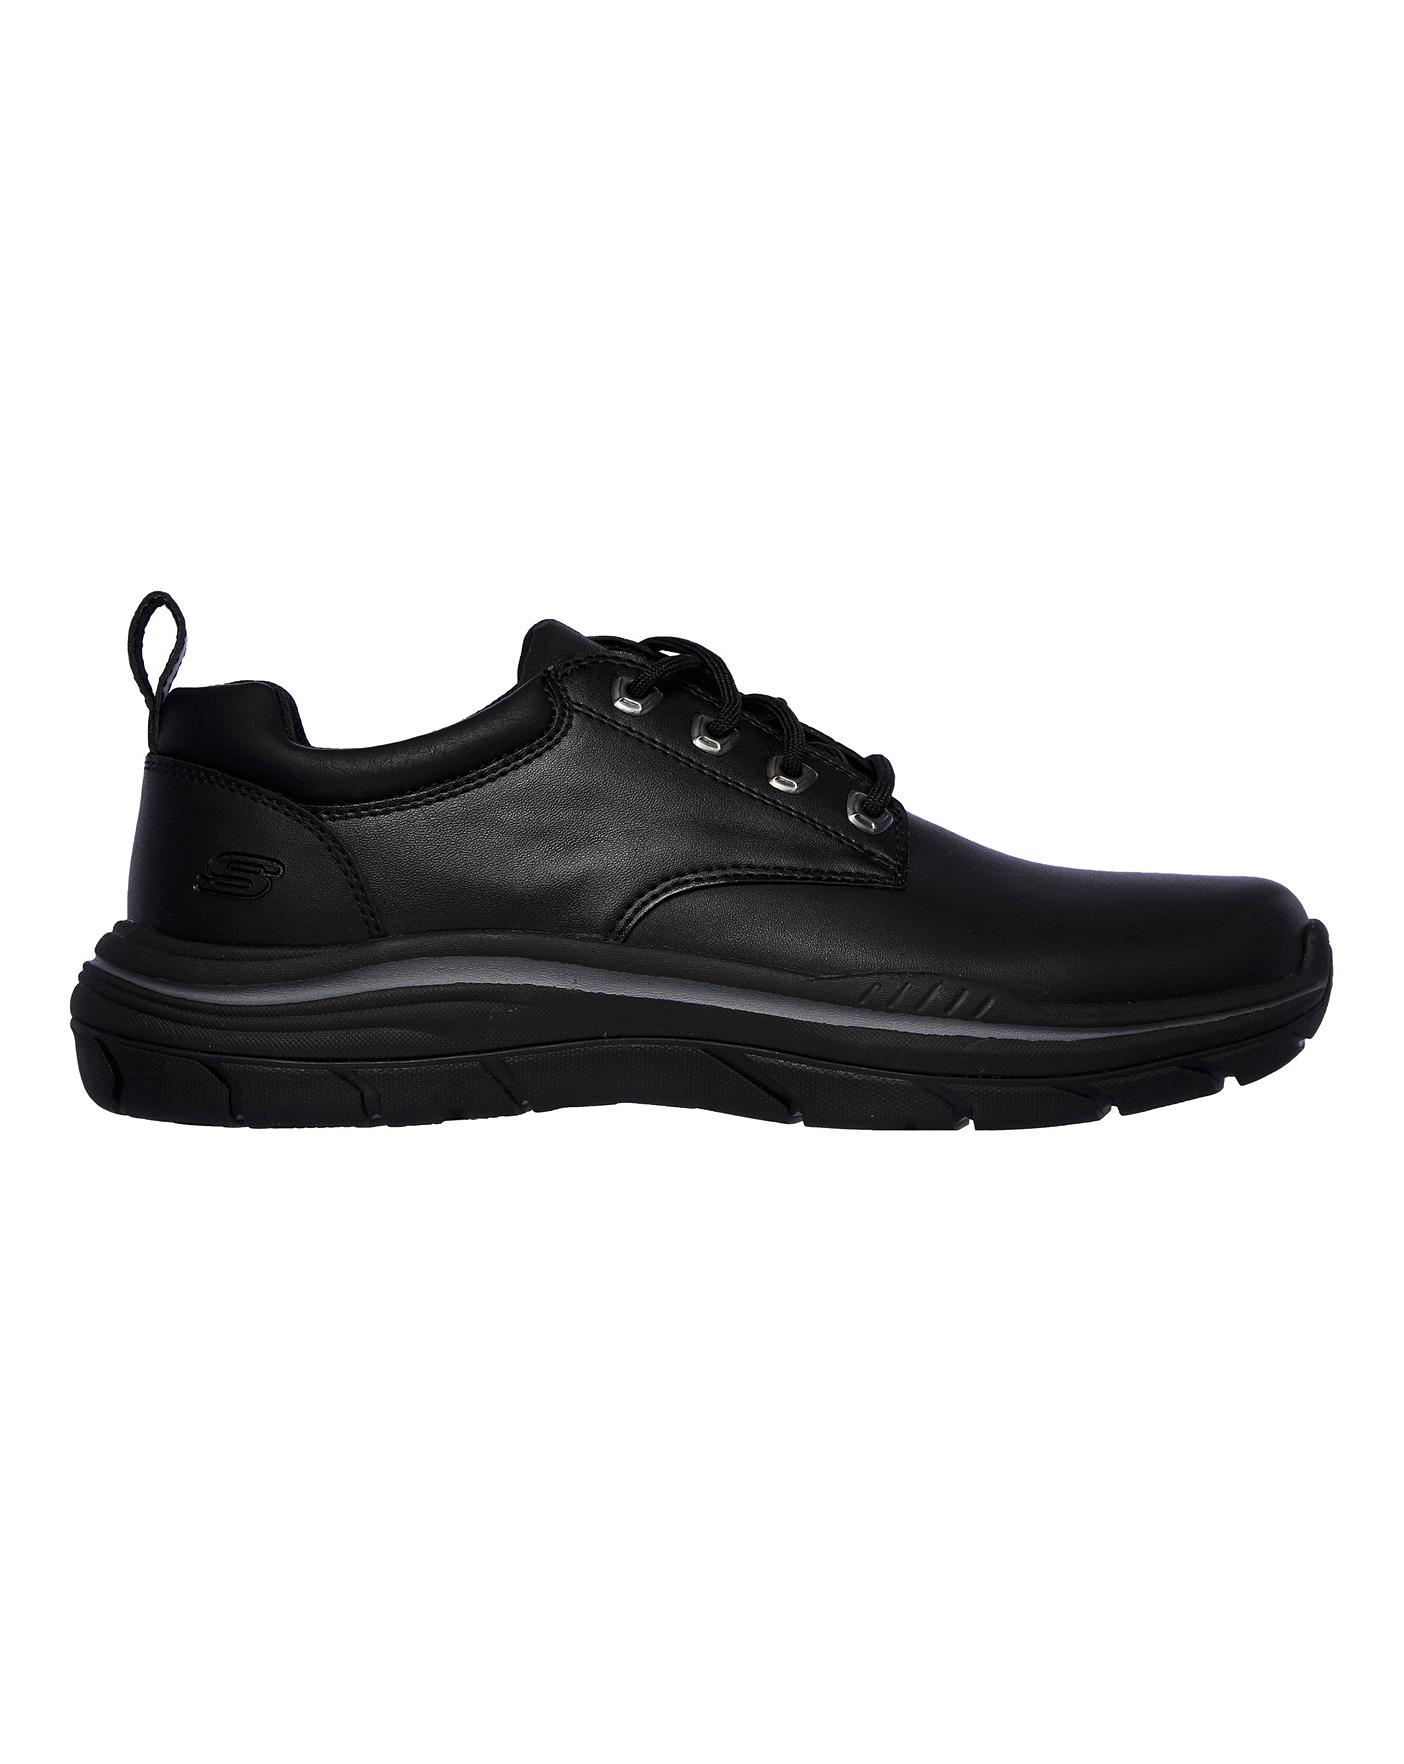 skechers lace up shoes